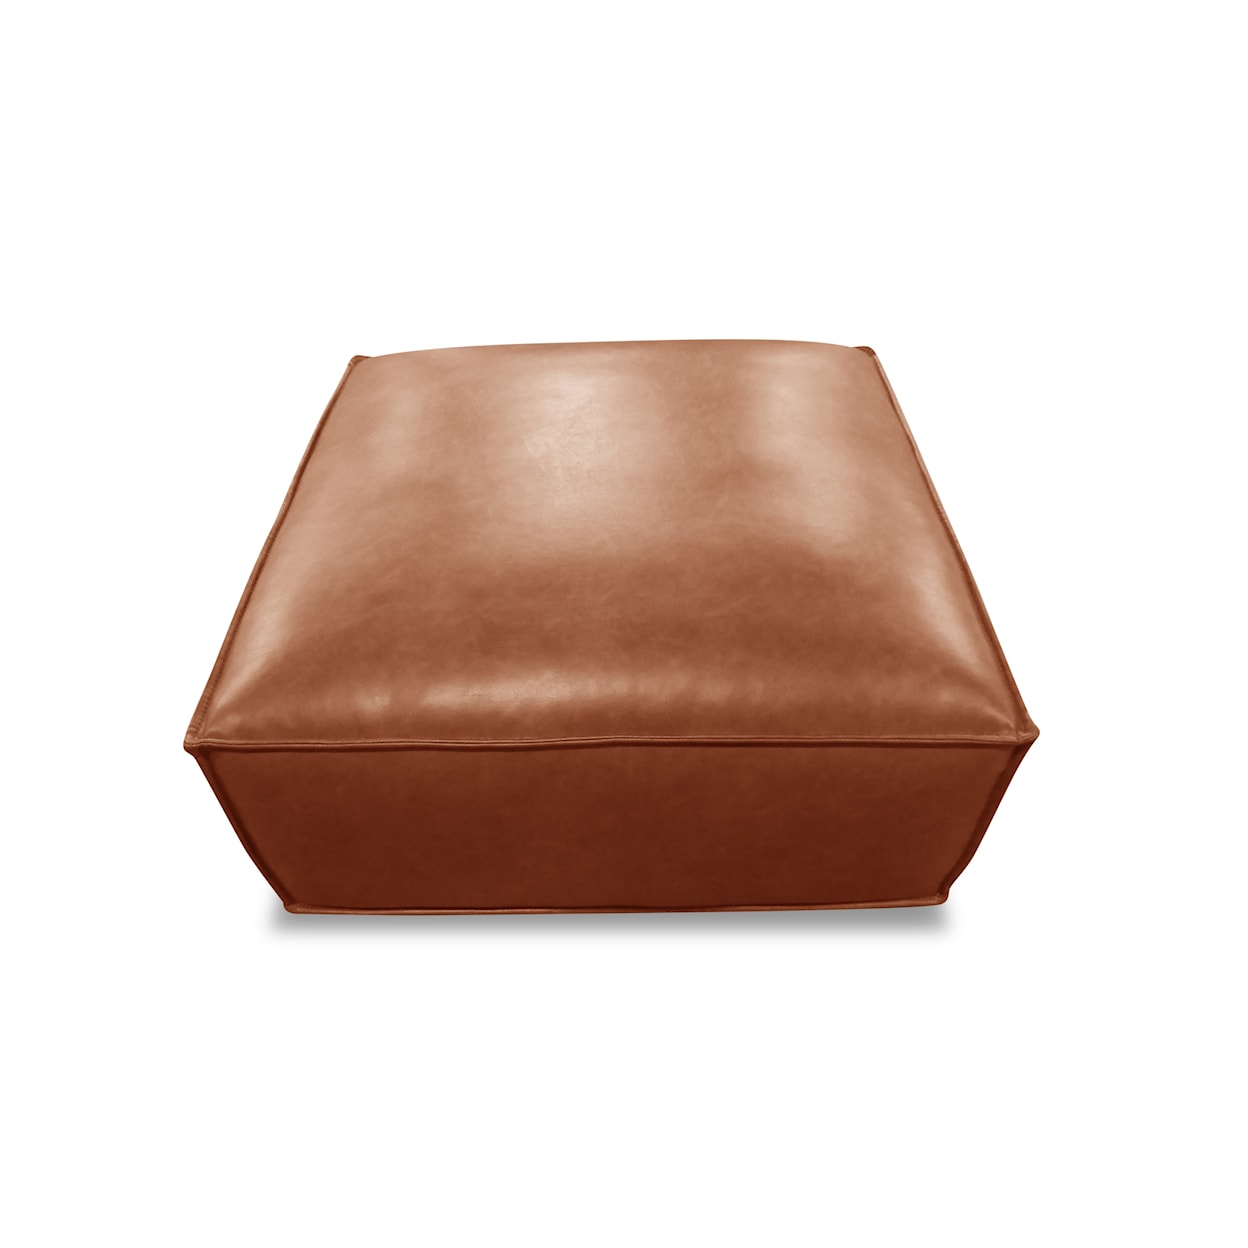 K.C. Kyren with Crypton Home Performance Fabric Byron Faux Leather Ottoman